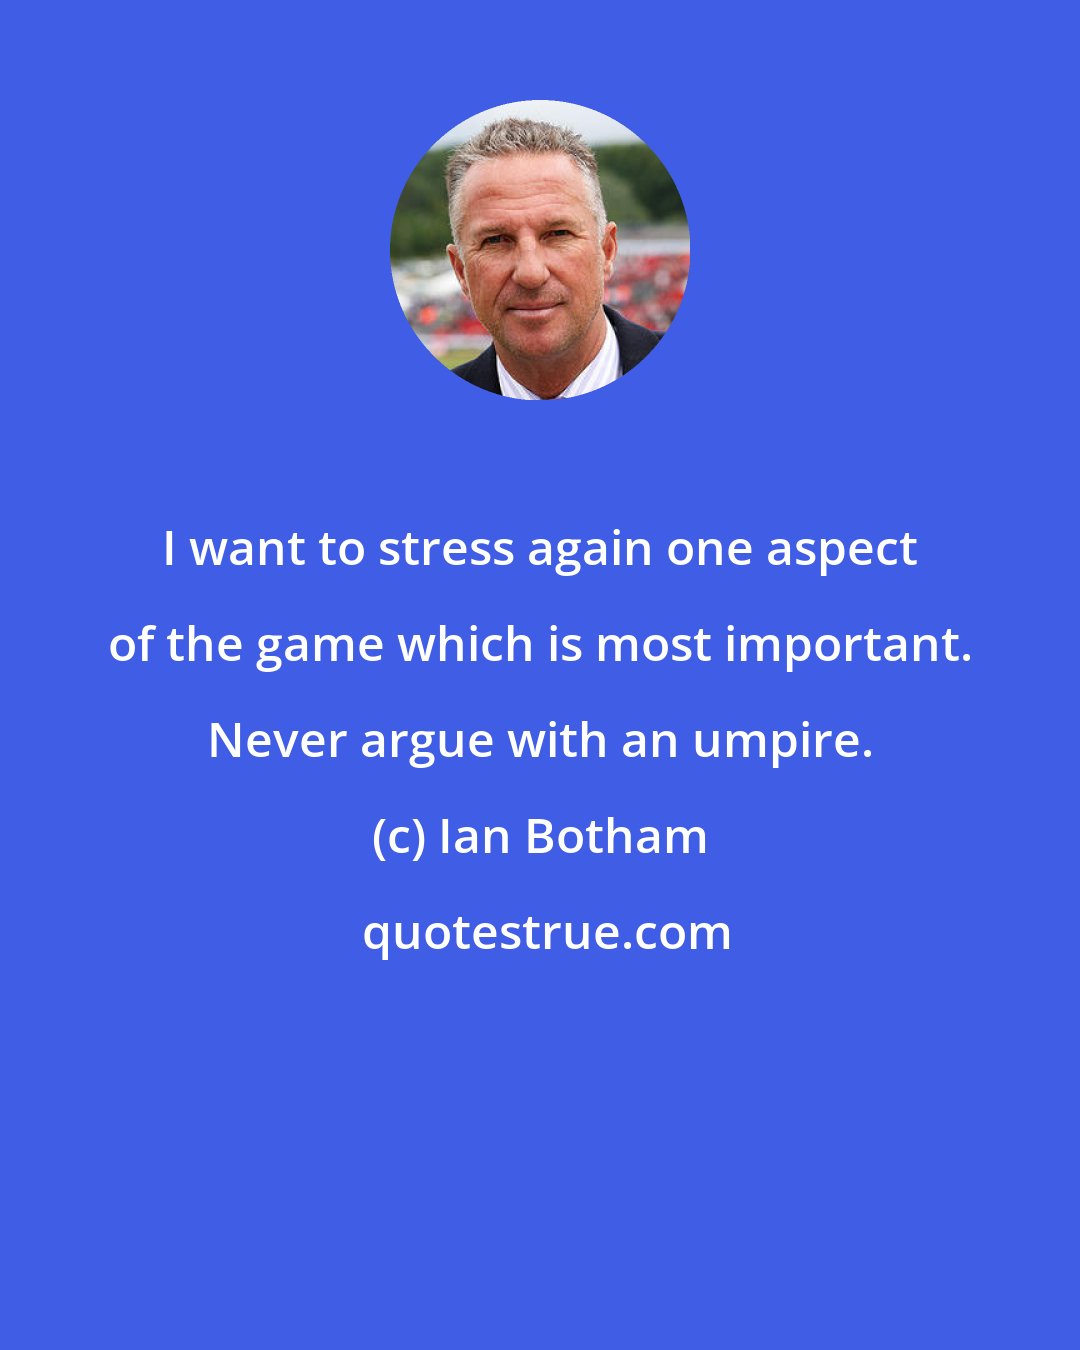 Ian Botham: I want to stress again one aspect of the game which is most important. Never argue with an umpire.